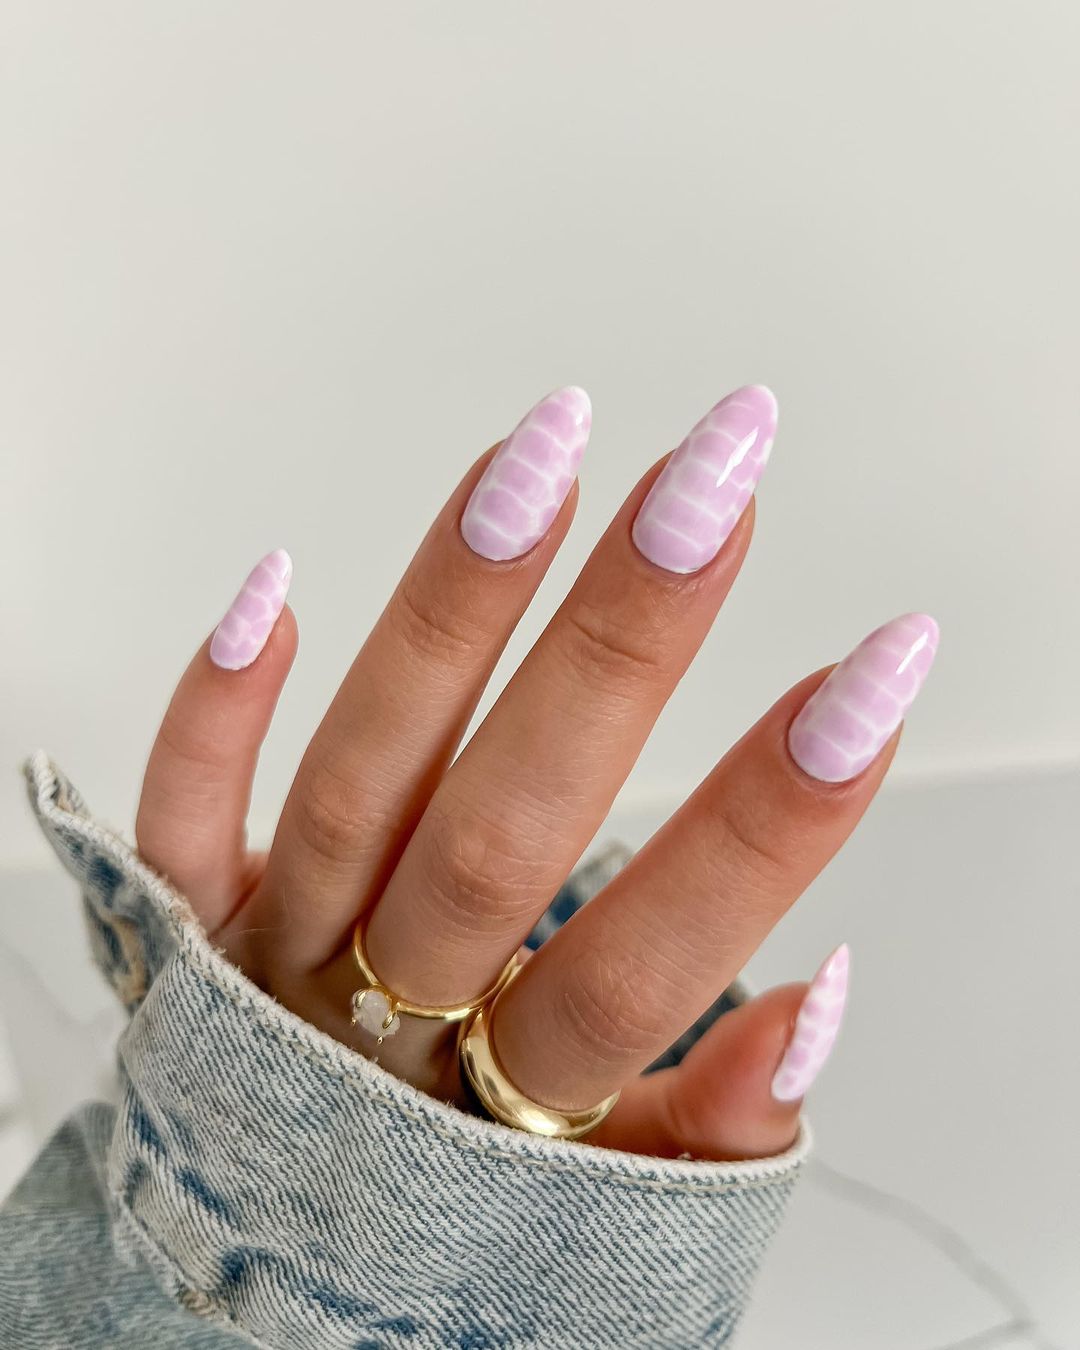 30 Easy Nails & Nail Art Designs To Try In 2022 images 21